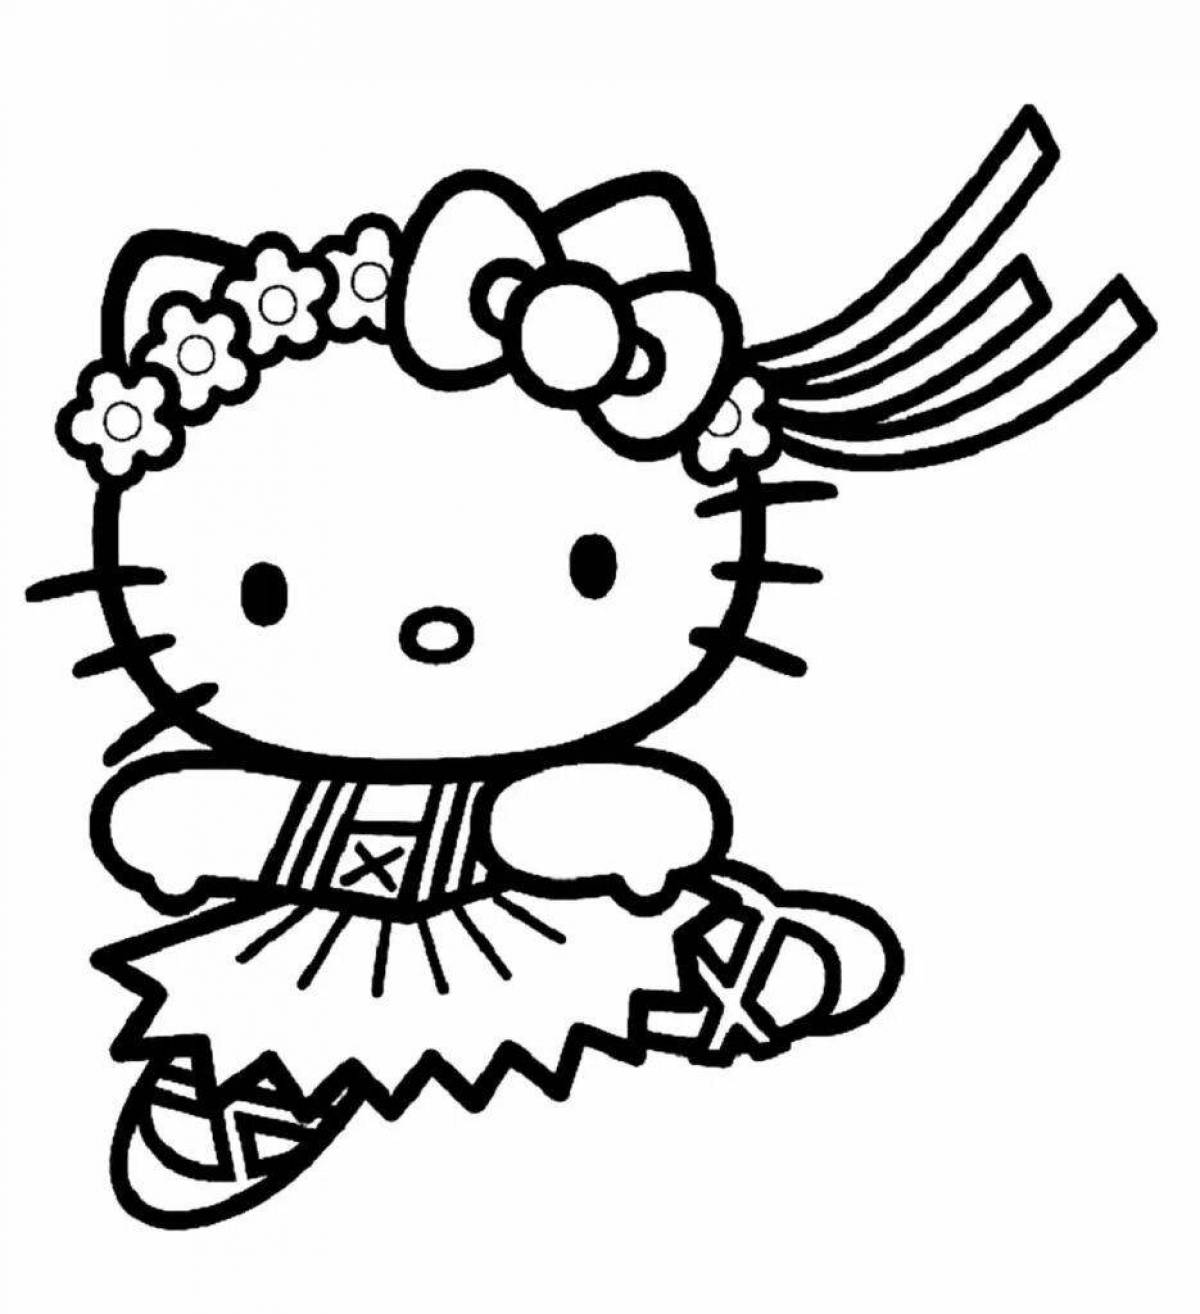 Great hello kitty coloring book for kids